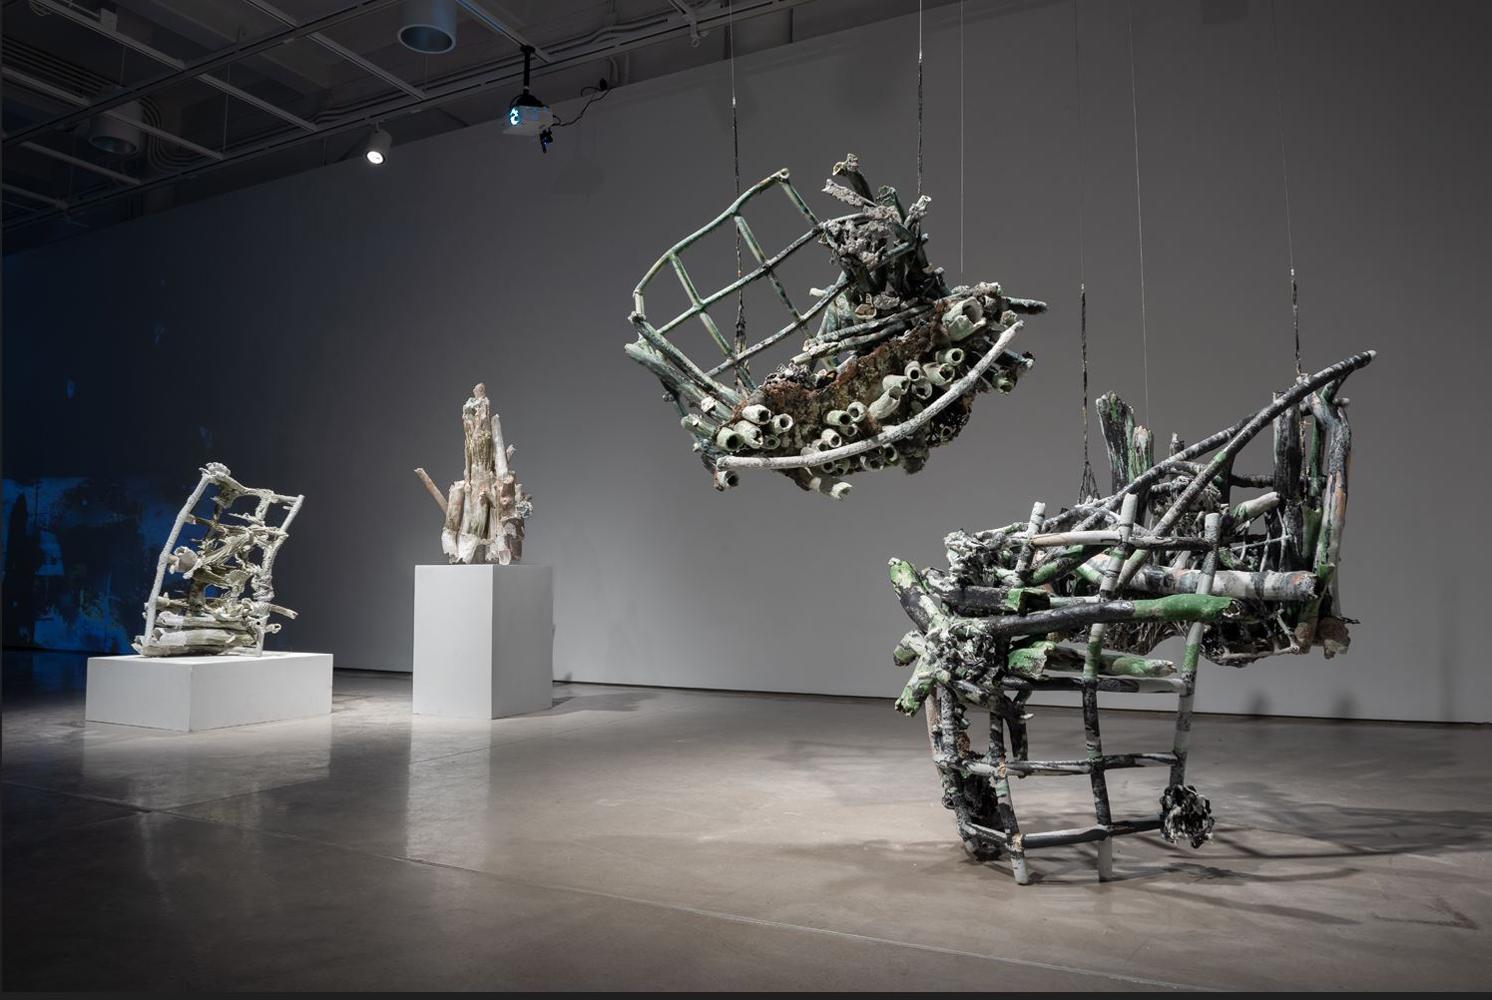 Installation image of a grouping of three large-scale grid sculptures, two of which are suspended by latex-coated nets. In the background, two more sculptures are visible on pedestals. 